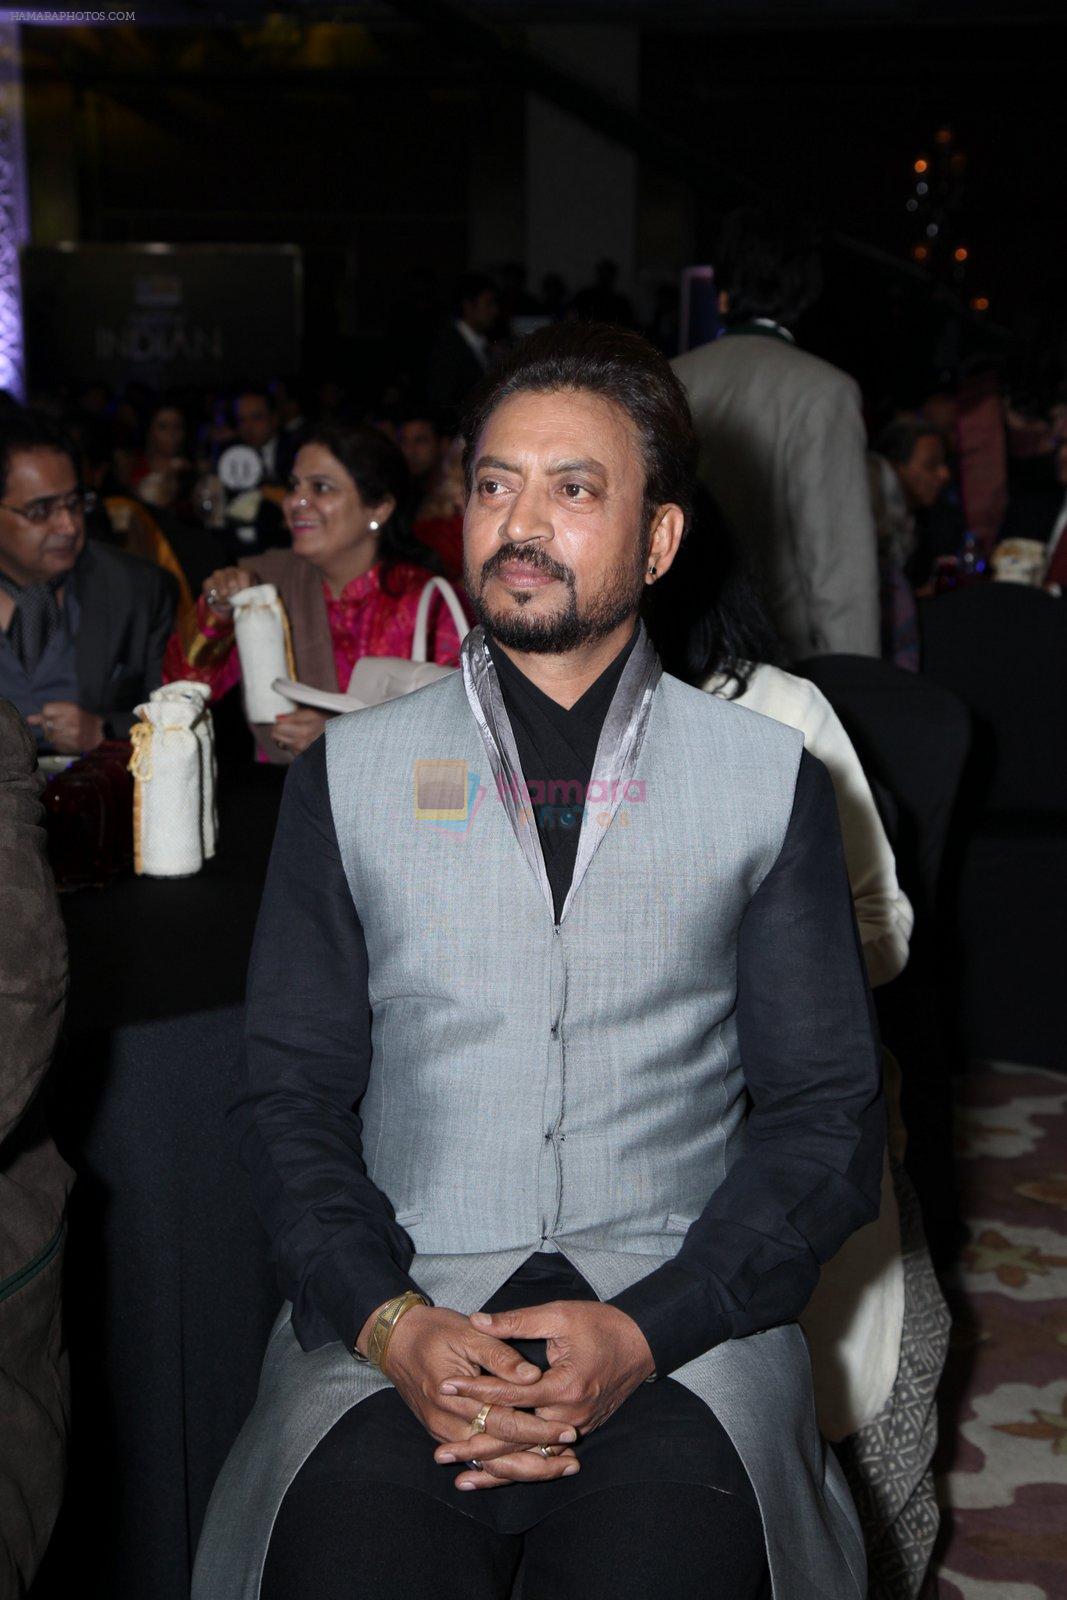 Irrfan Khan at NDTV Indian of the year on 5th Feb 2016